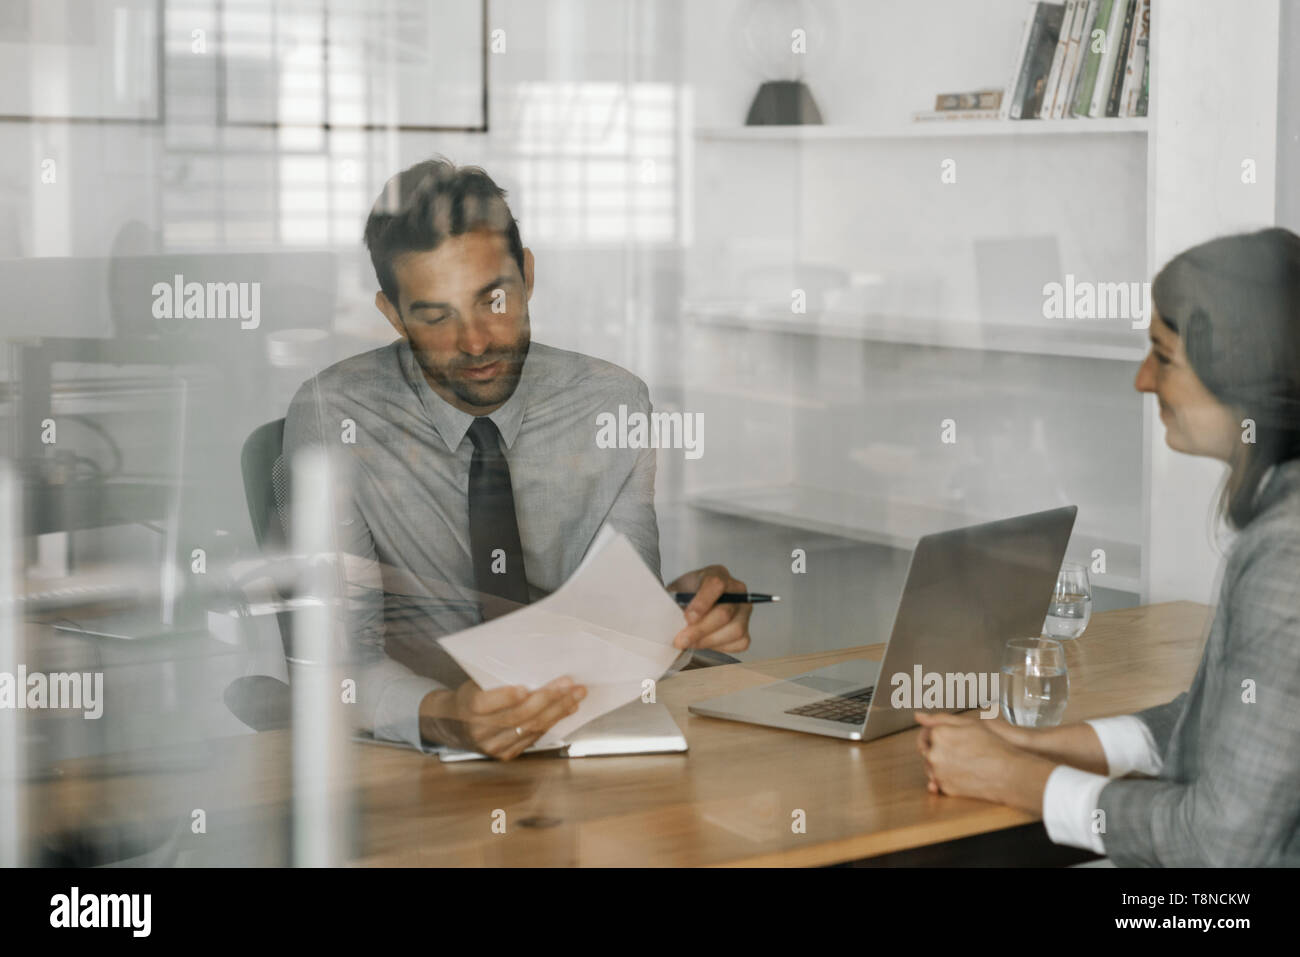 Content manager reading an applicant's resume during an interview Stock Photo